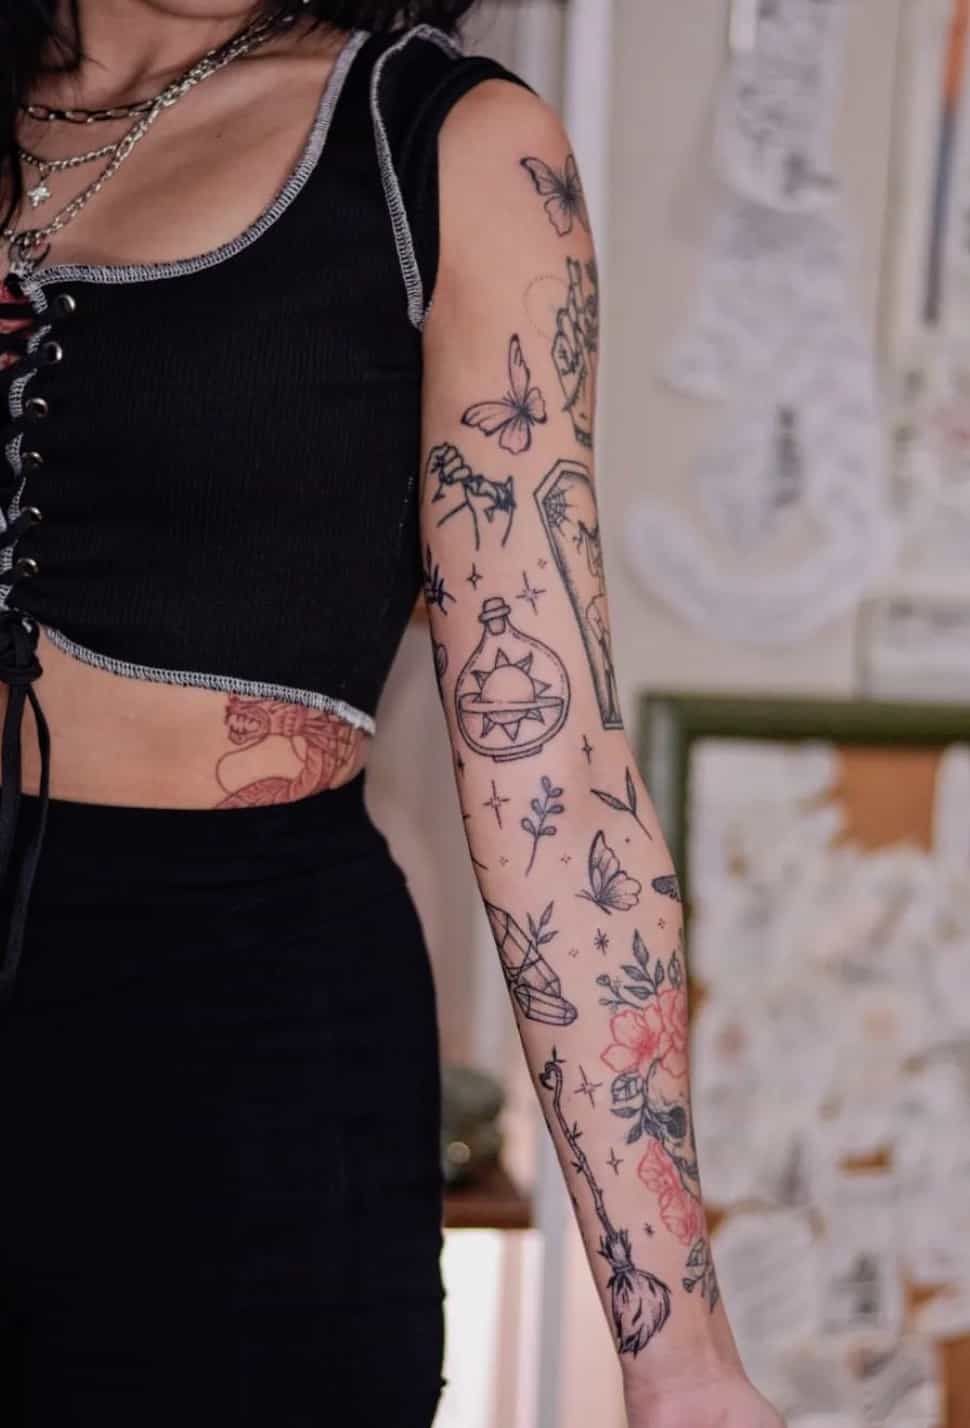 50 Patchwork Tattoos to Make You Start a Sleeve